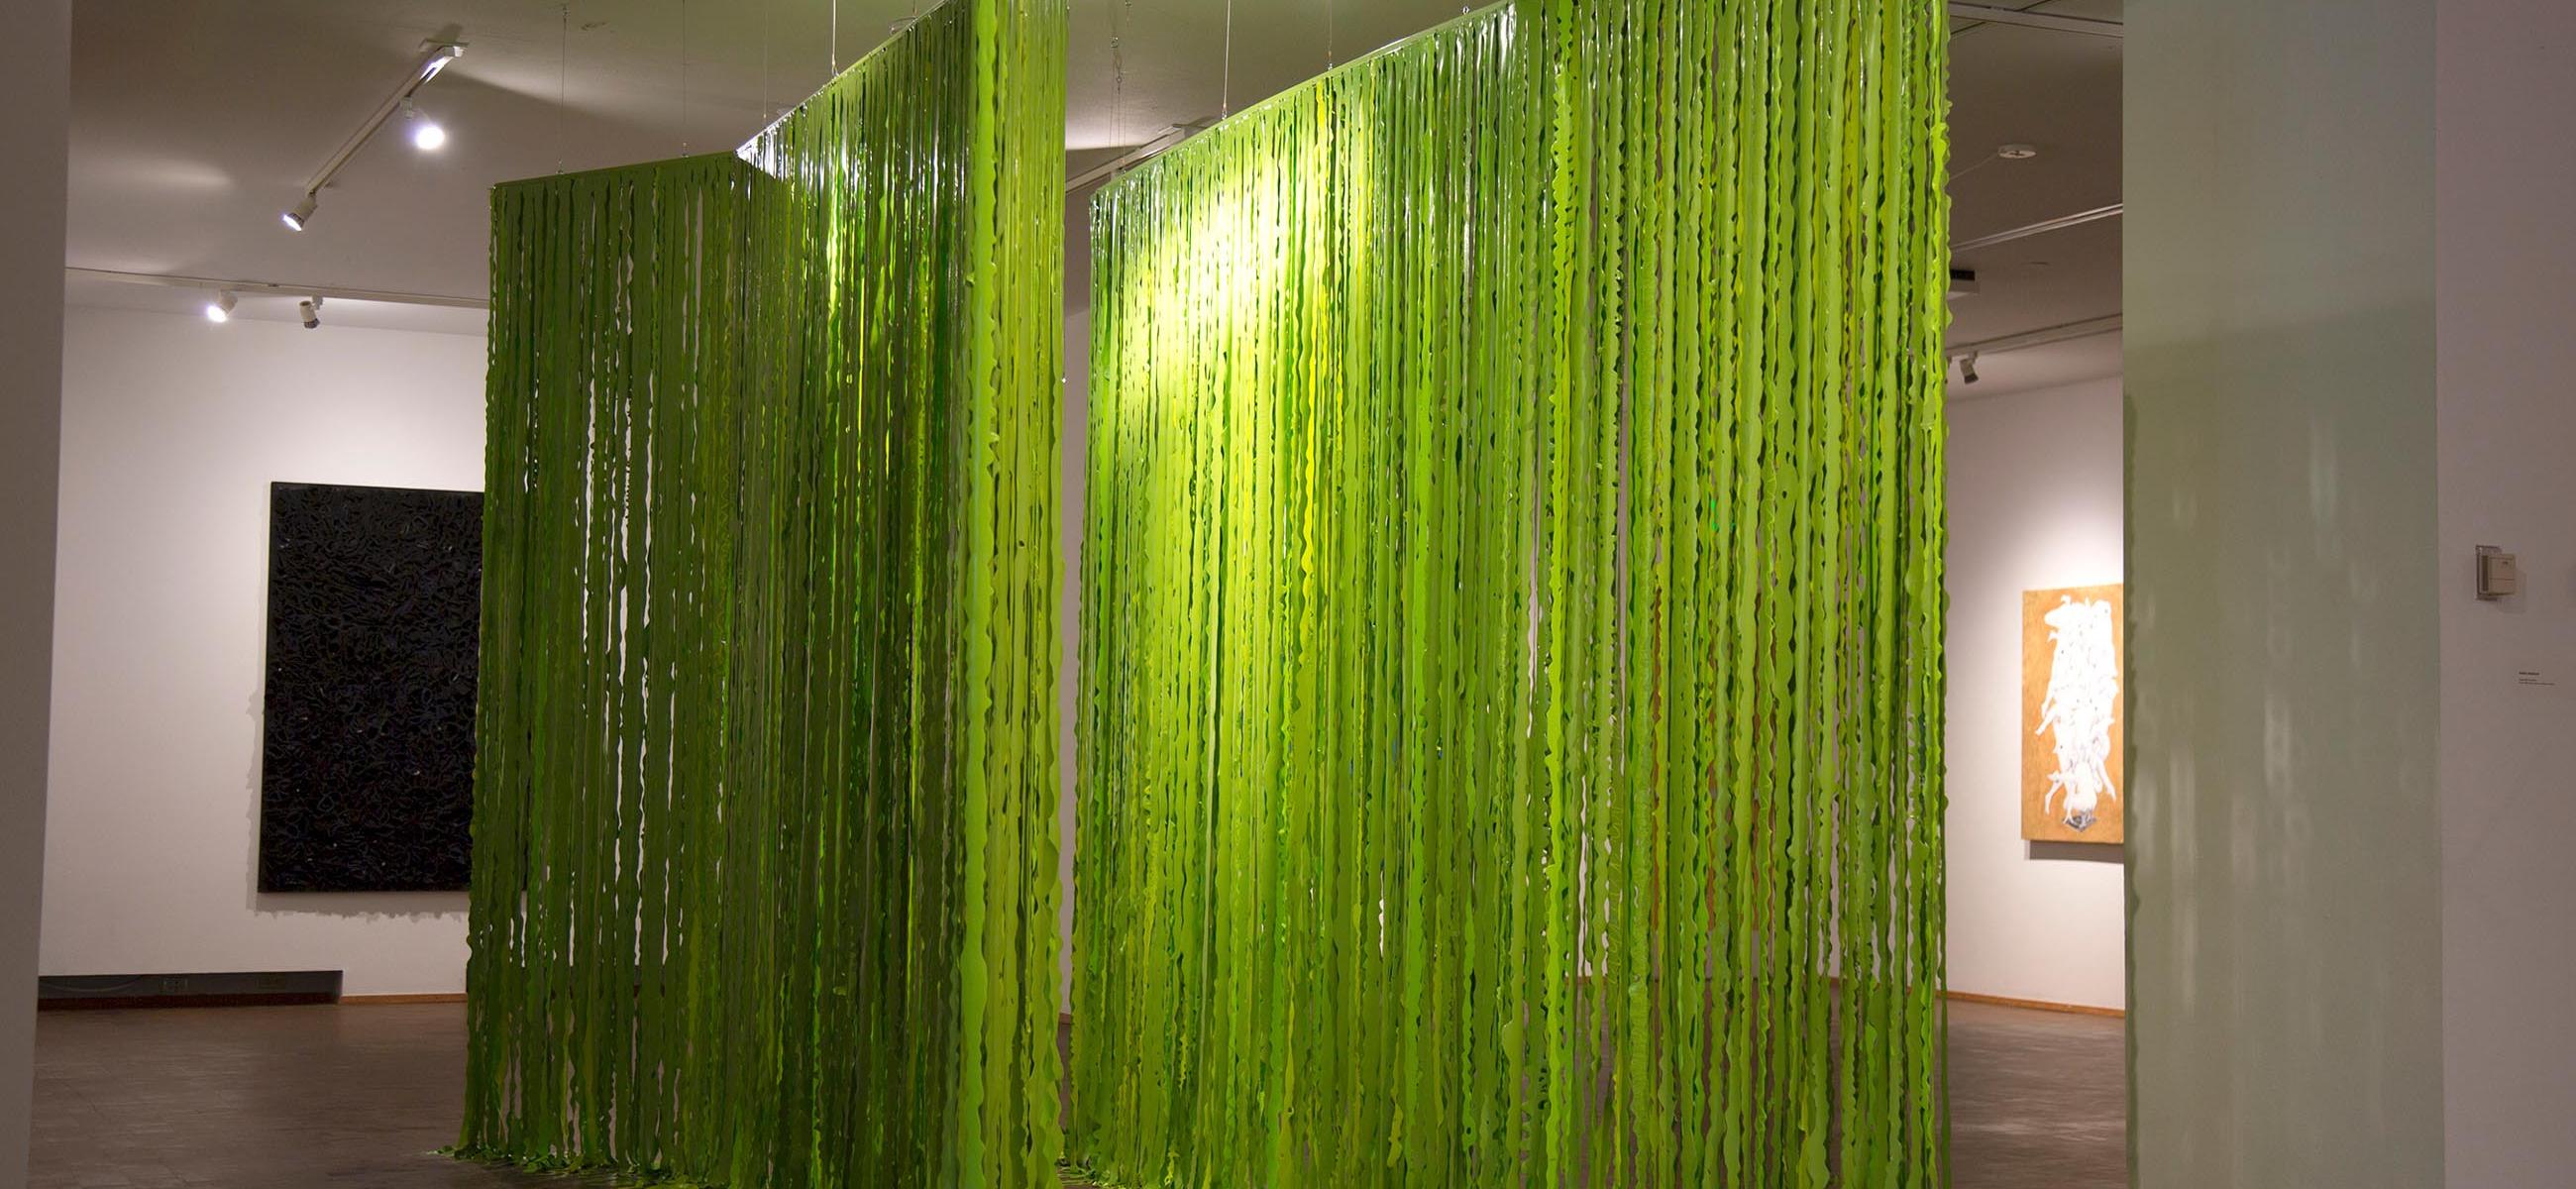 slick green drapes in a gallery